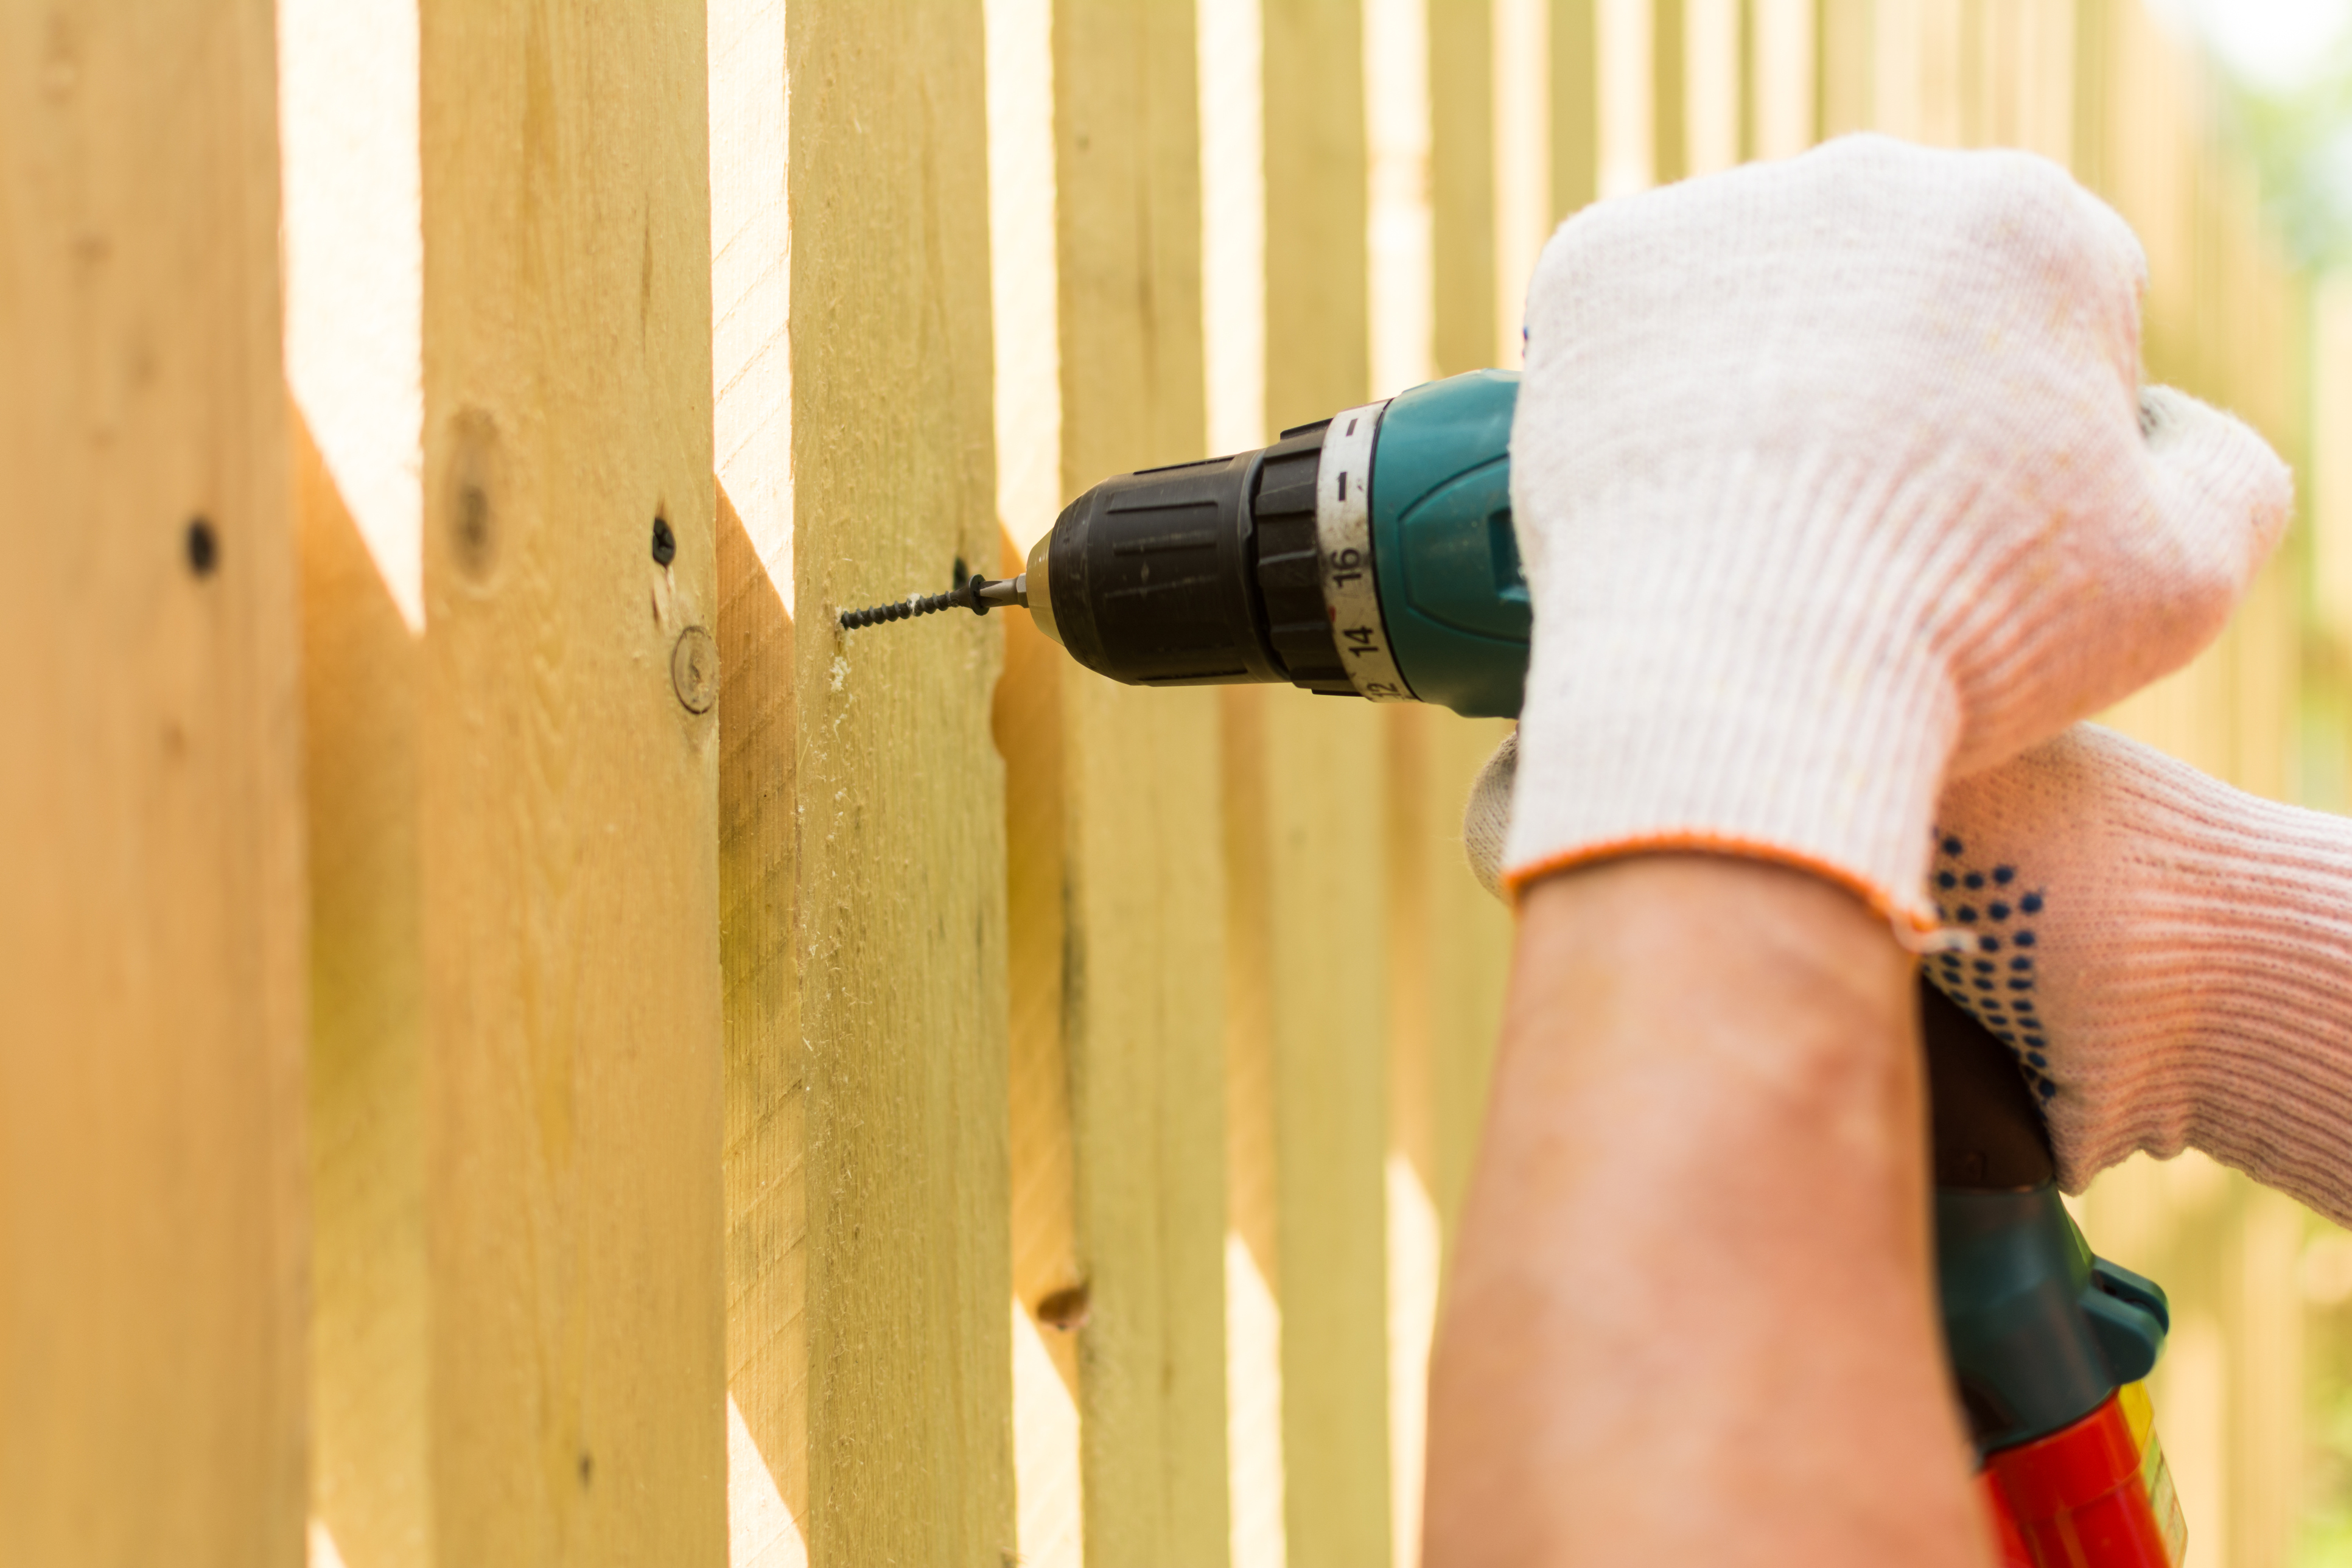 Close-up of person wearing glove drilling into a wooden fence